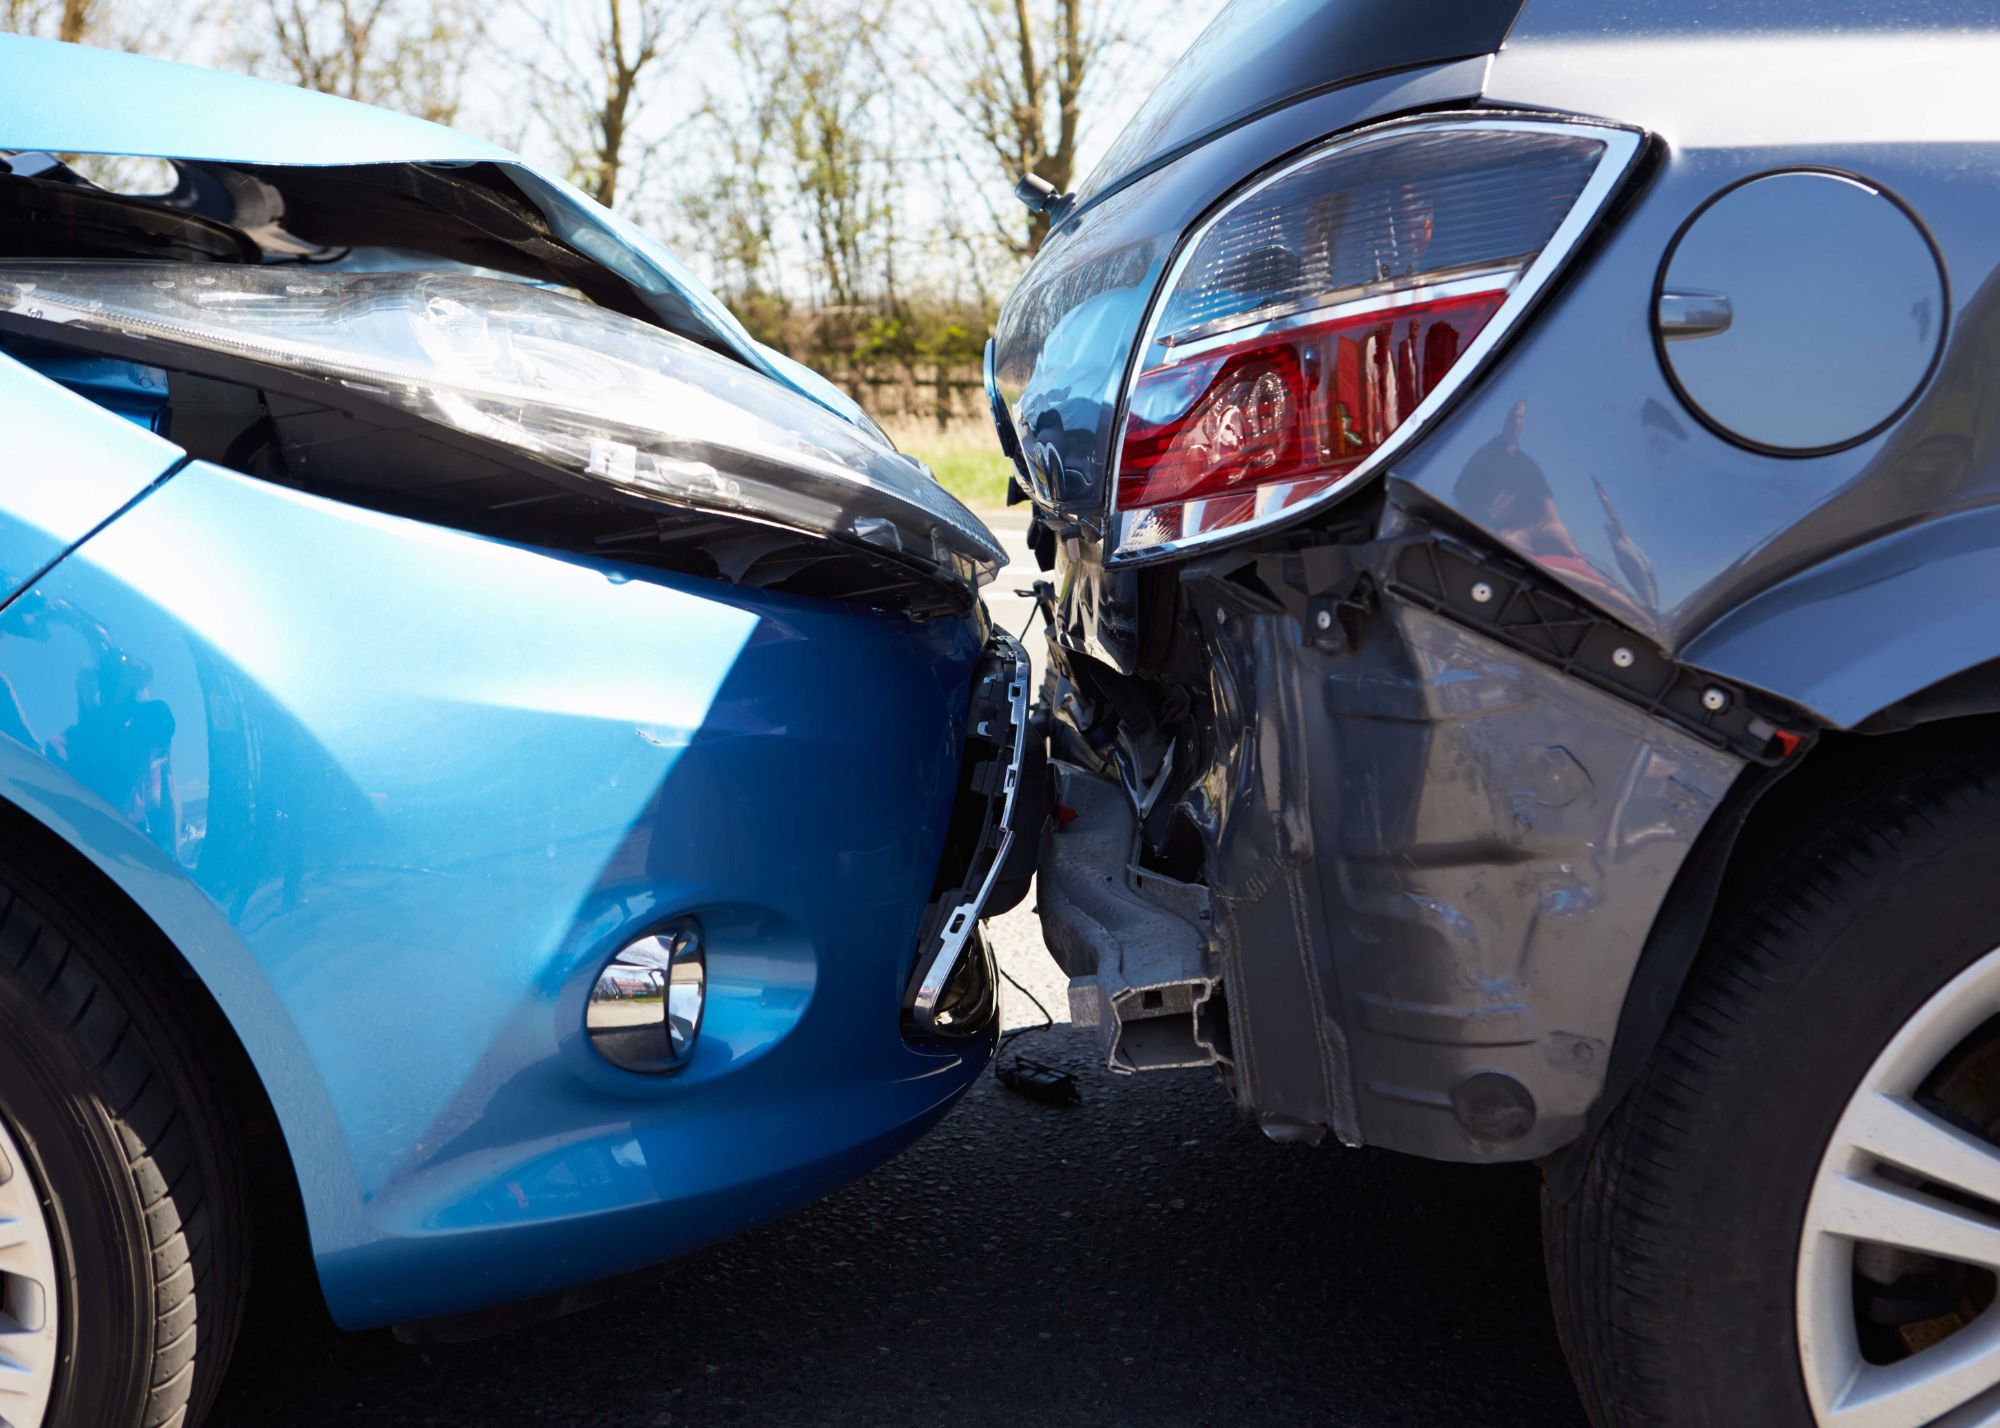 Understanding just what is SR22 Car Accident Insurance options for Colorado Springs residents